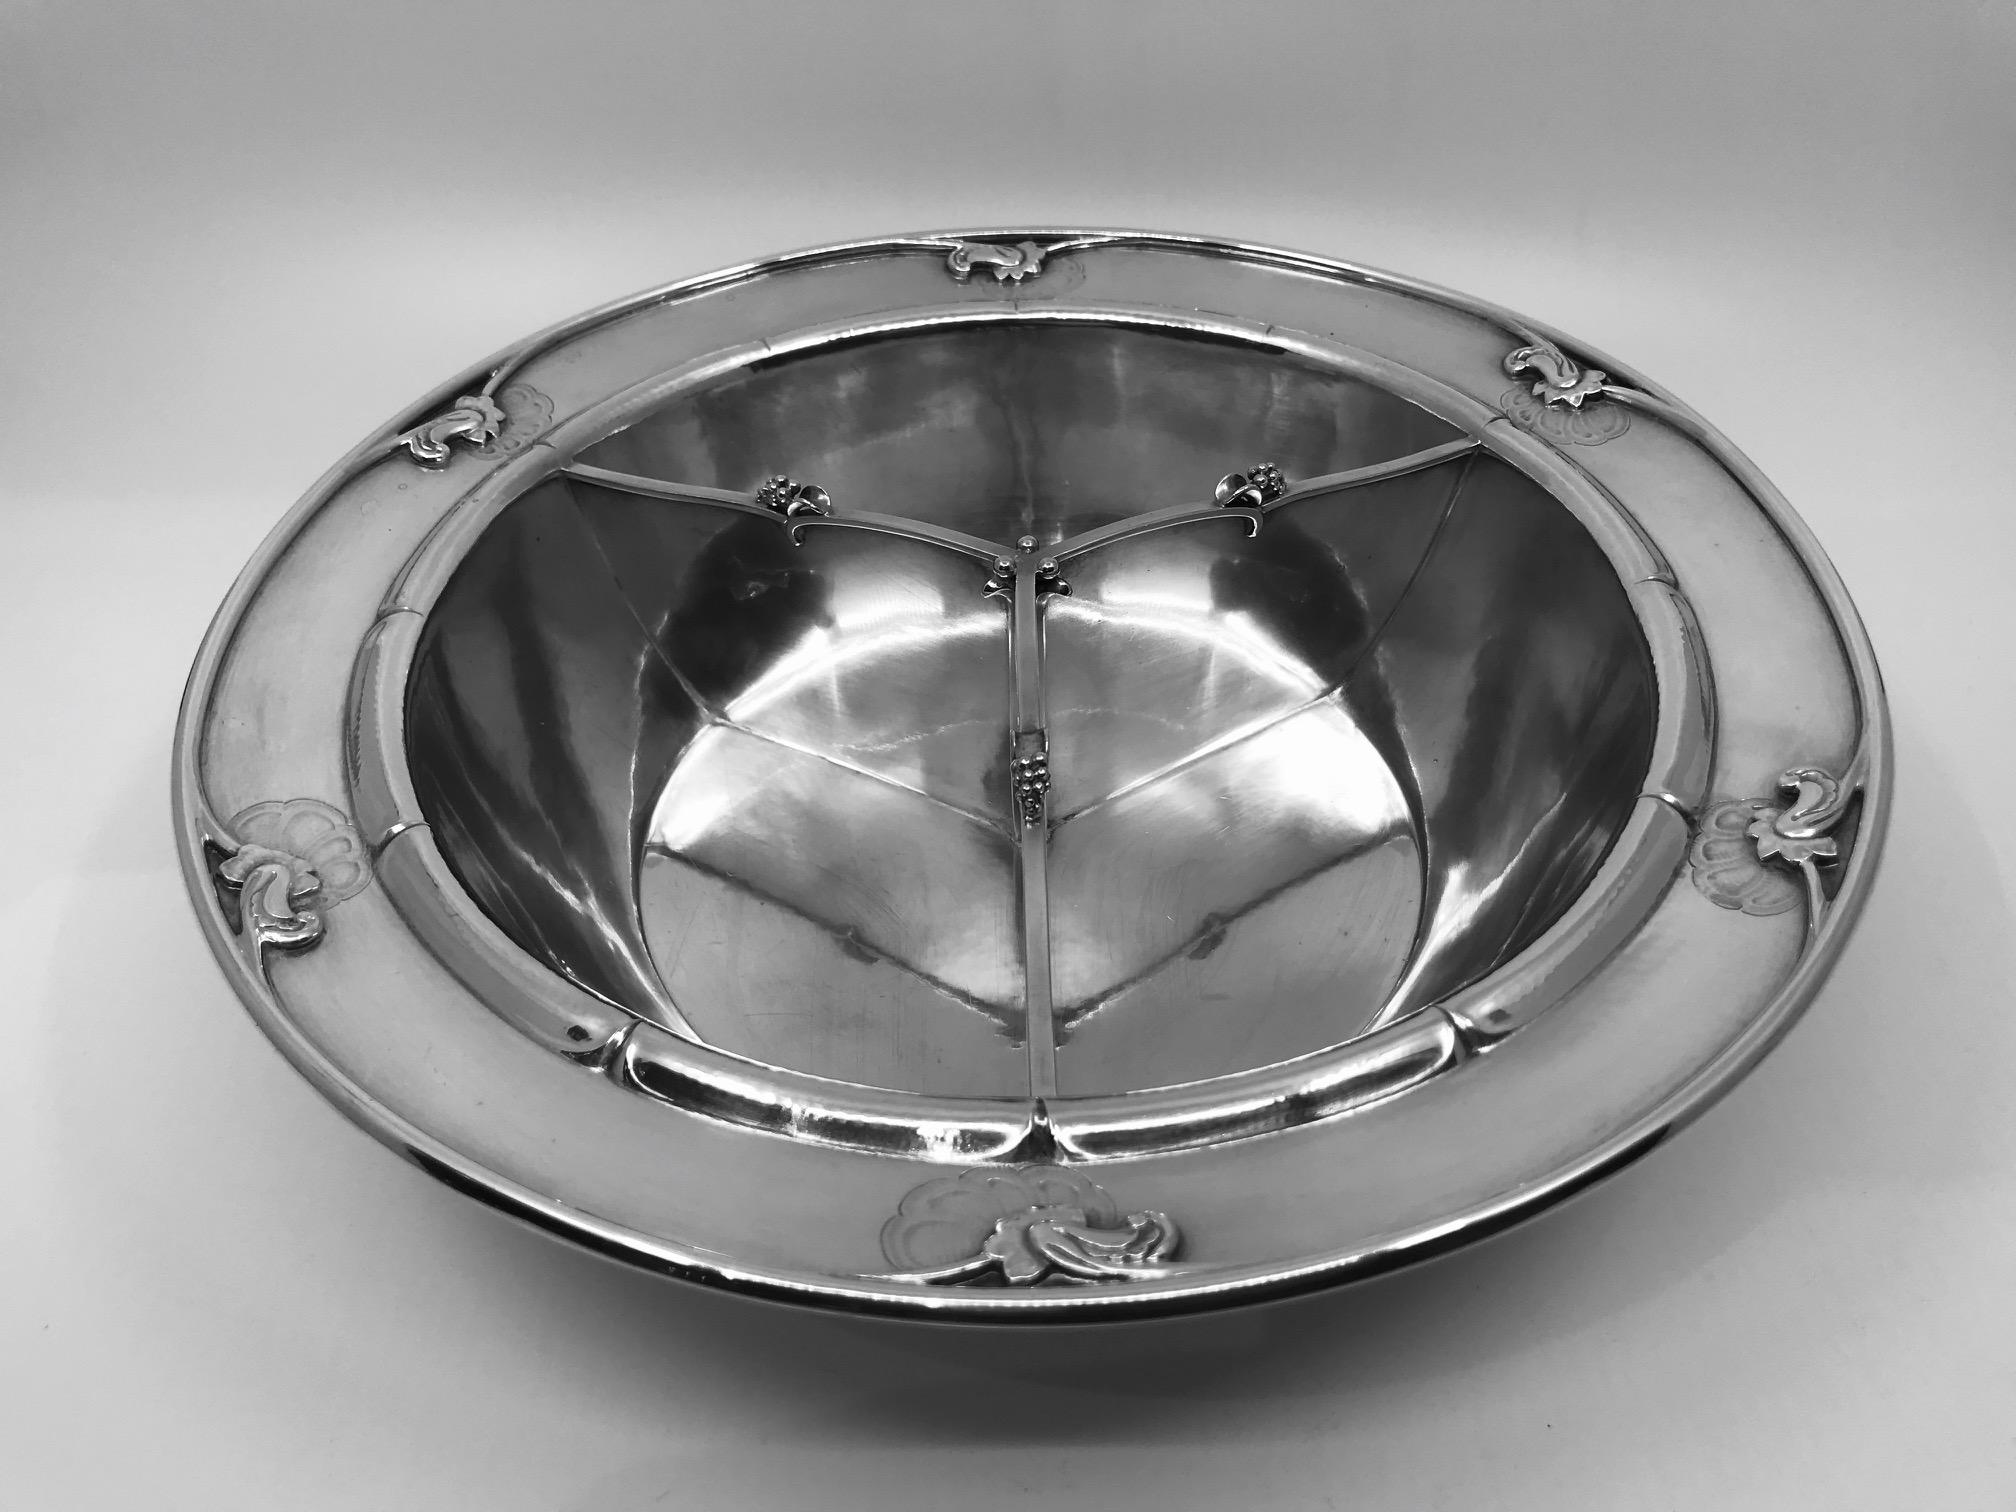 This is a sterling silver Georg Jensen vegetable bowl with a fixed inbuilt divider, dividing the bowl into three sections, design #228C by Georg Jensen.

Measures: 2 3/4? in height and 11? in diameter (7cm, 28cm). This piece is heavy, weighing